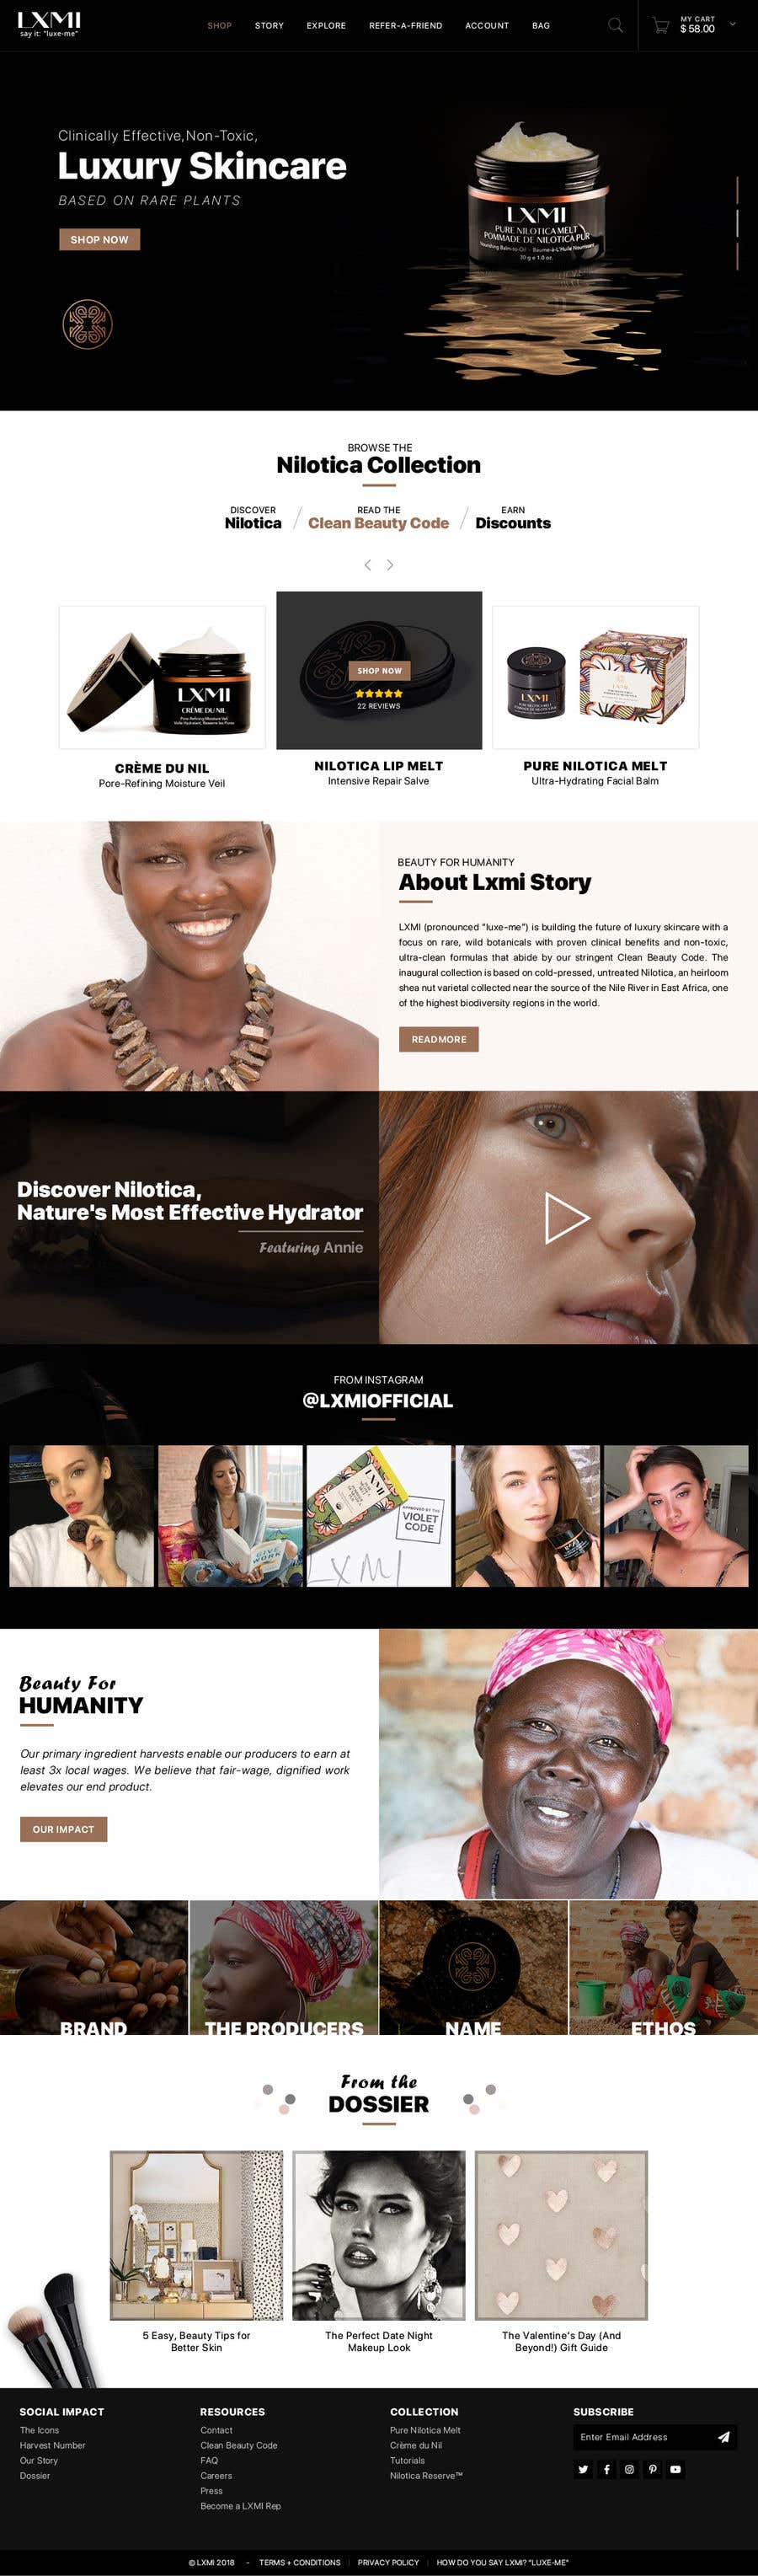 Proposition n°44 du concours                                                 Homepage Redesign for Luxury Skincare Brand
                                            